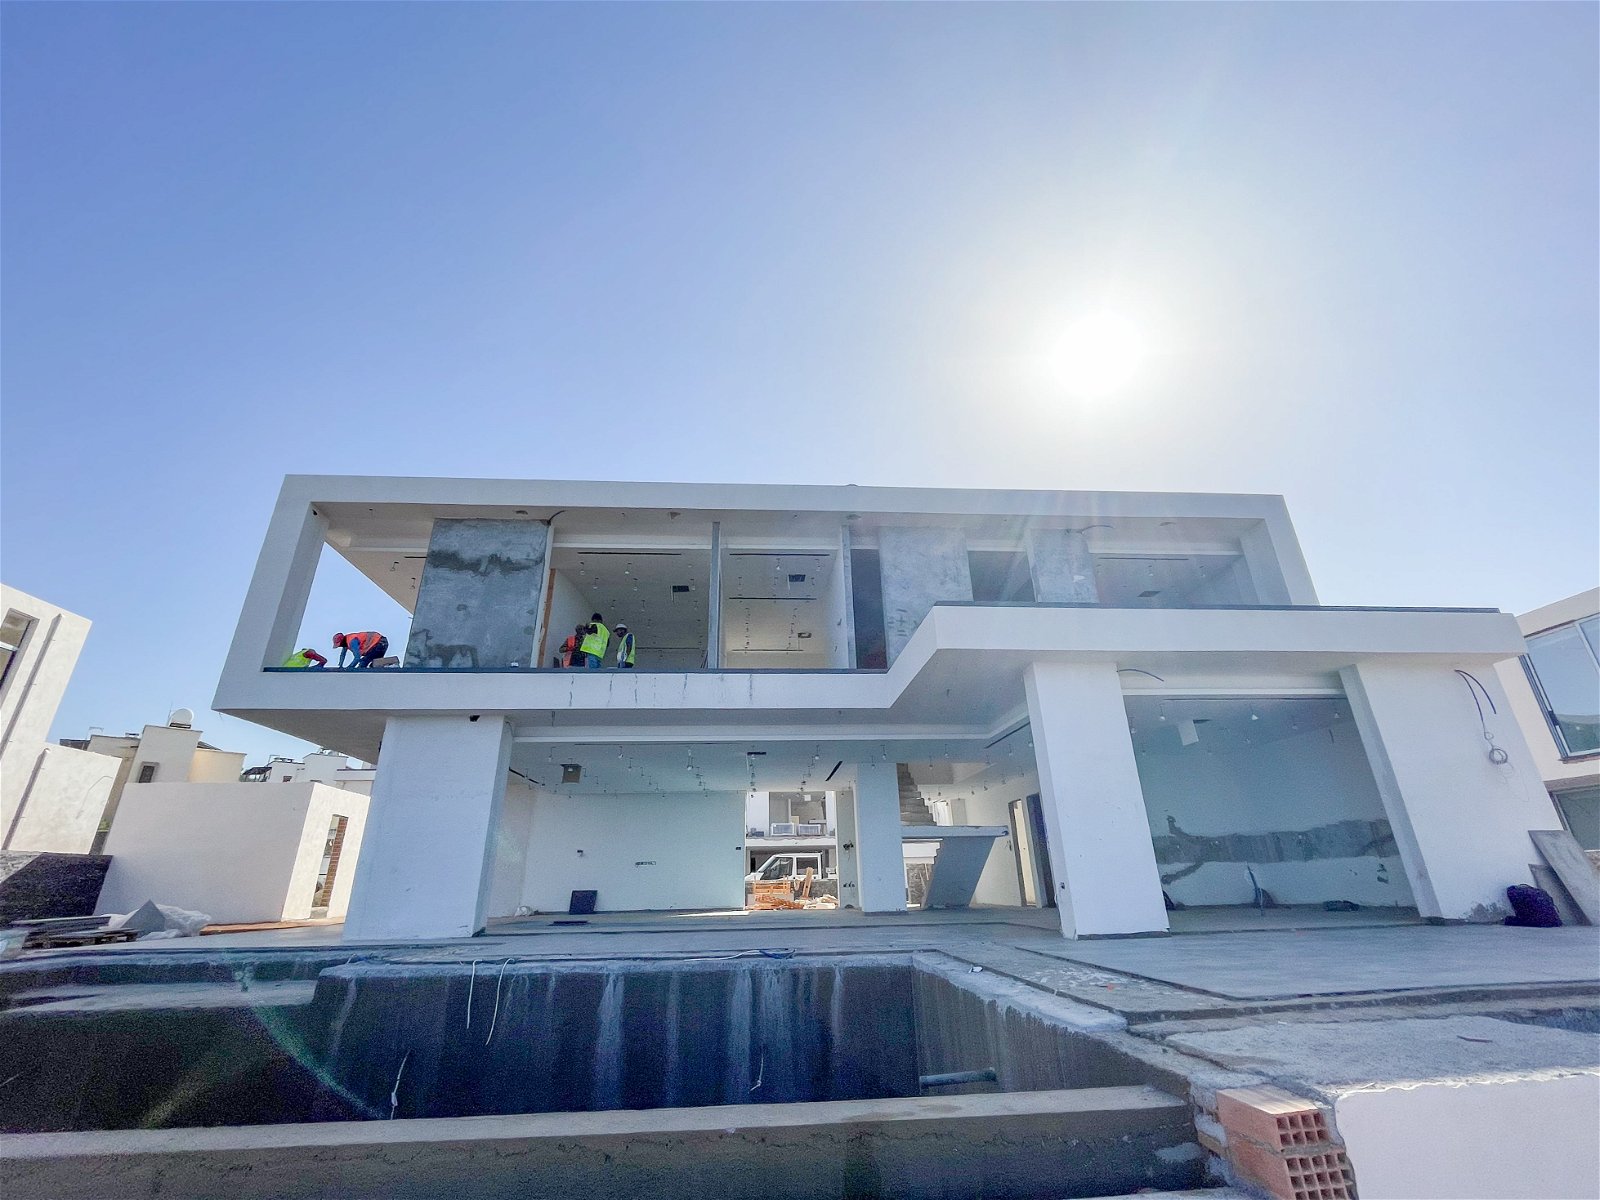 Luxury Seafront Villa in Esentepe with 5 Bedrooms-f58855a7-5ba1-4d20-a9af-13a9b9d6941e